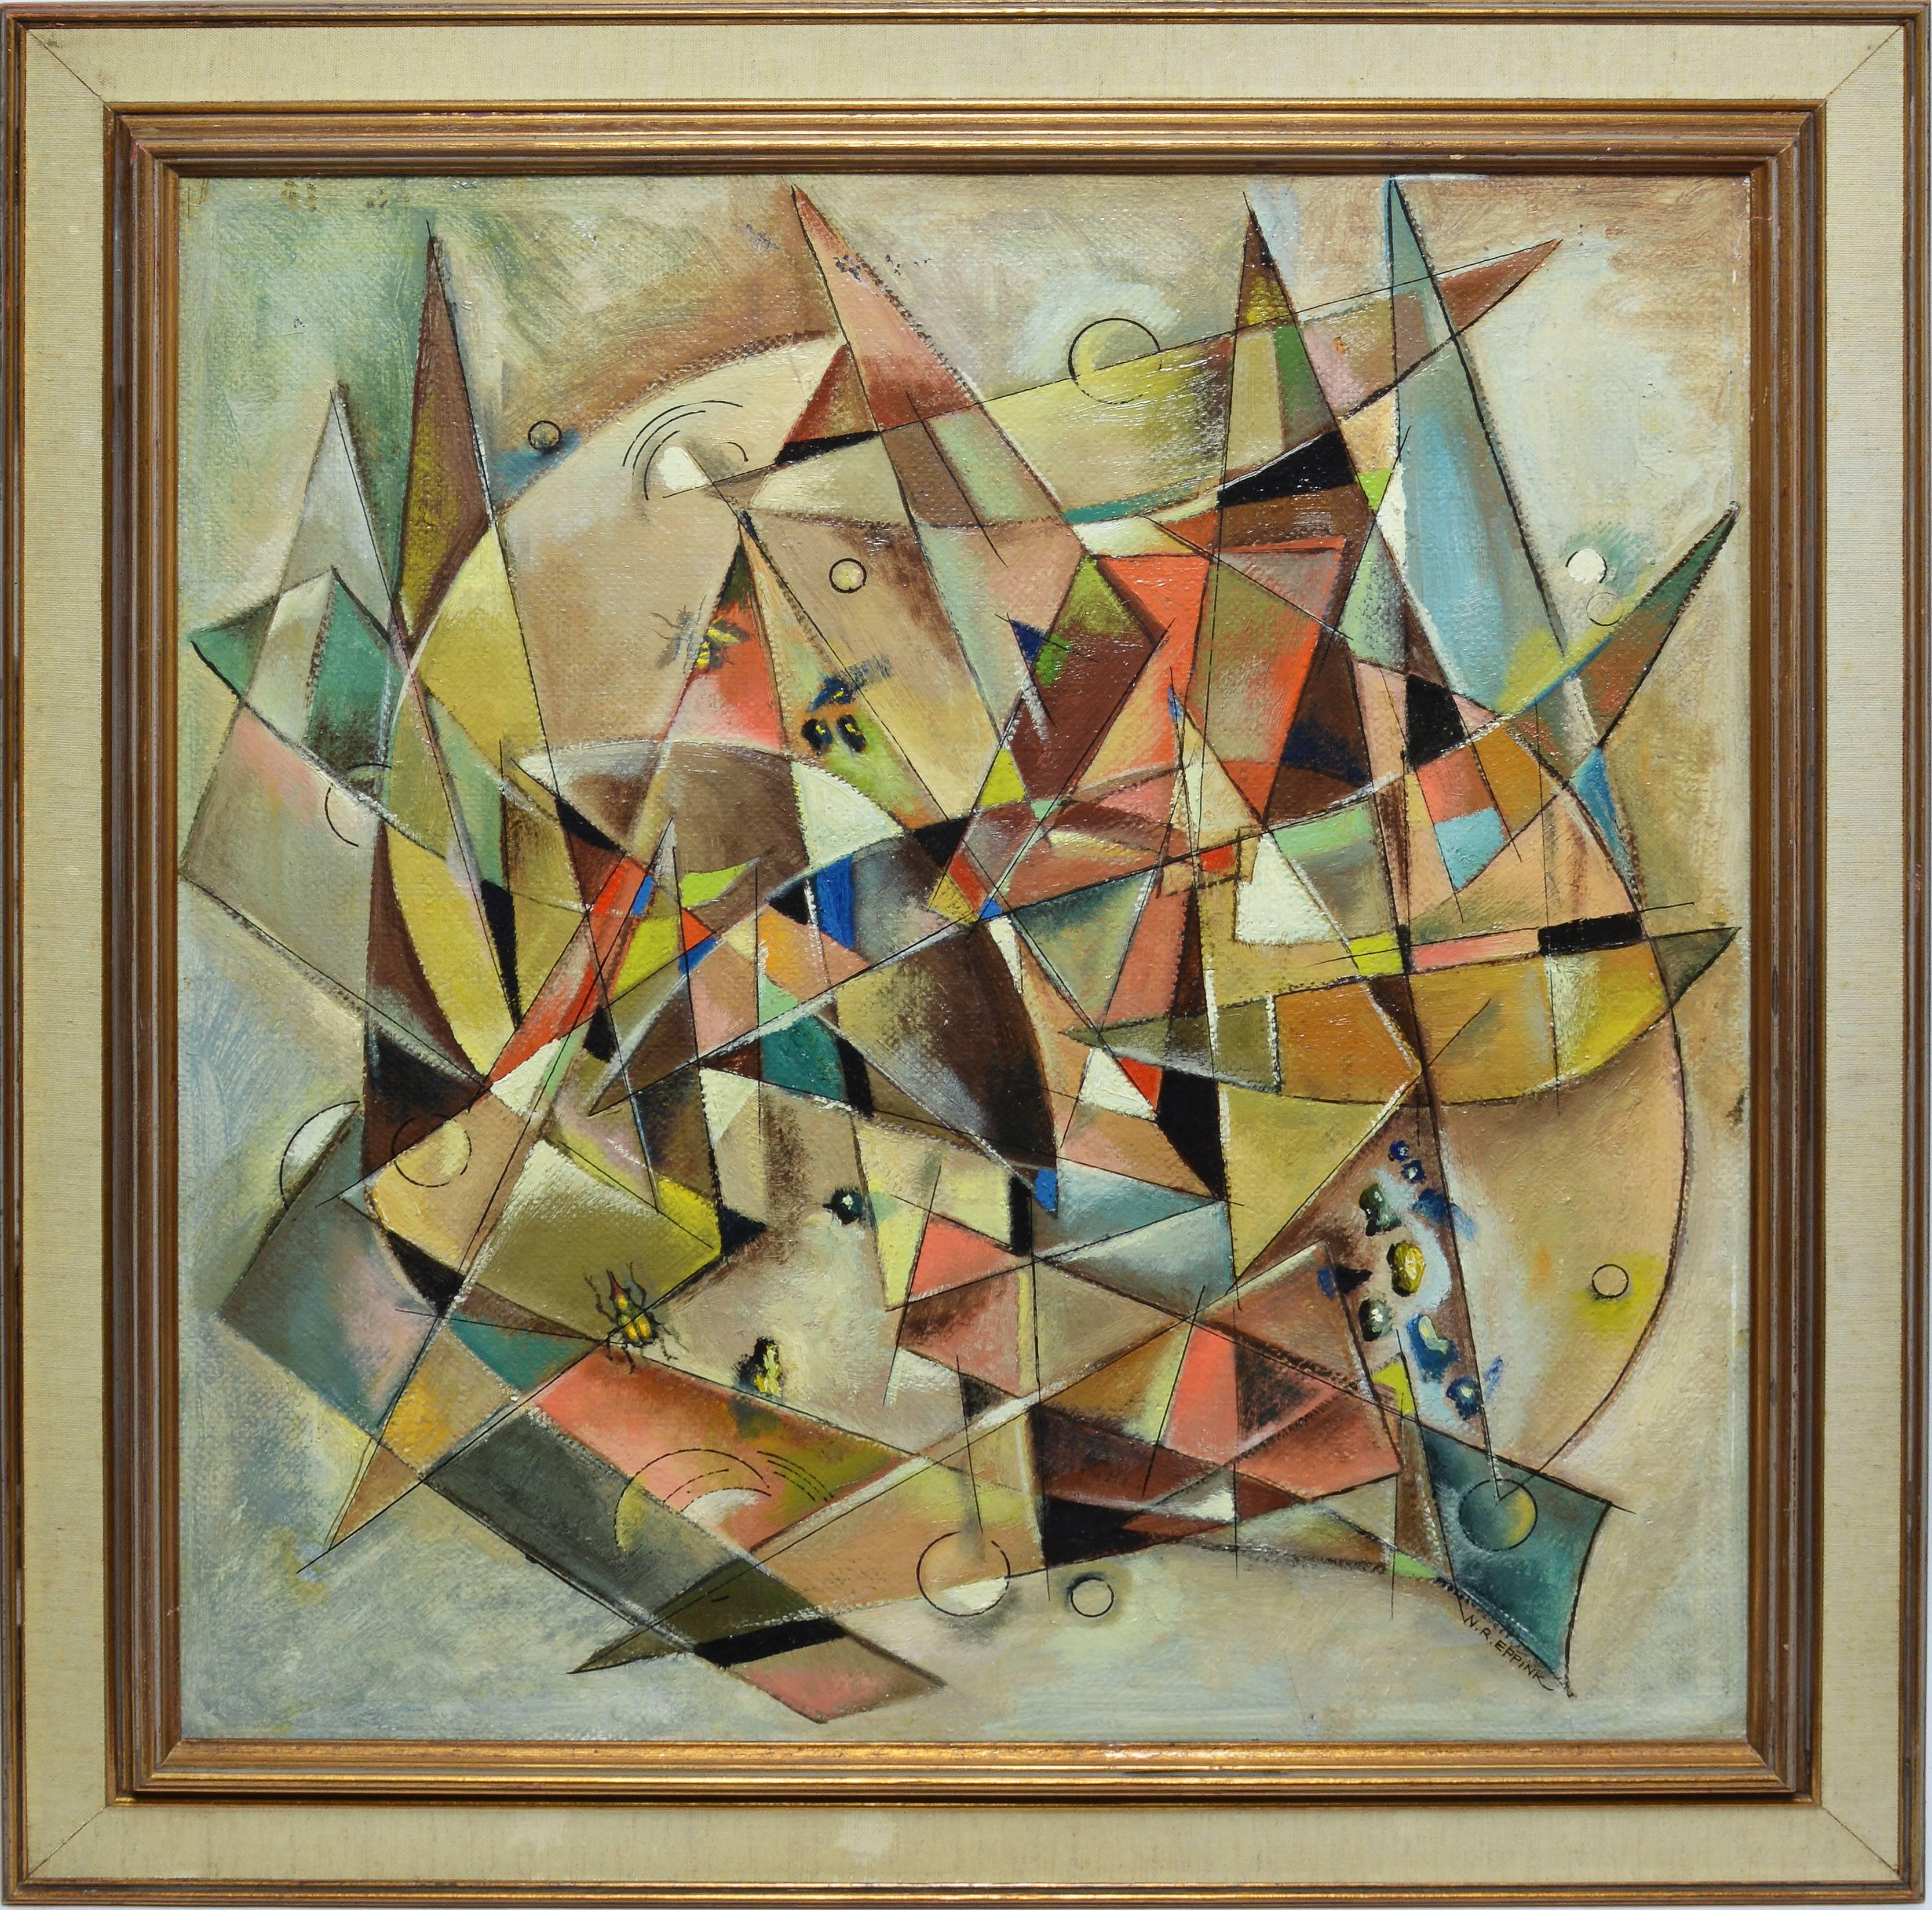 Cubist abstract still life by Norman Eppink (1906-1985).  Oil on canvas, circ 1940.  Signed lower right, &quot;N. R. Eppink&quot;.  Displayed in a grey and gold modernist frame.  Image size, 22&quot;L x 24&quot;H, overall 27&quot;L x 29&quot;H.